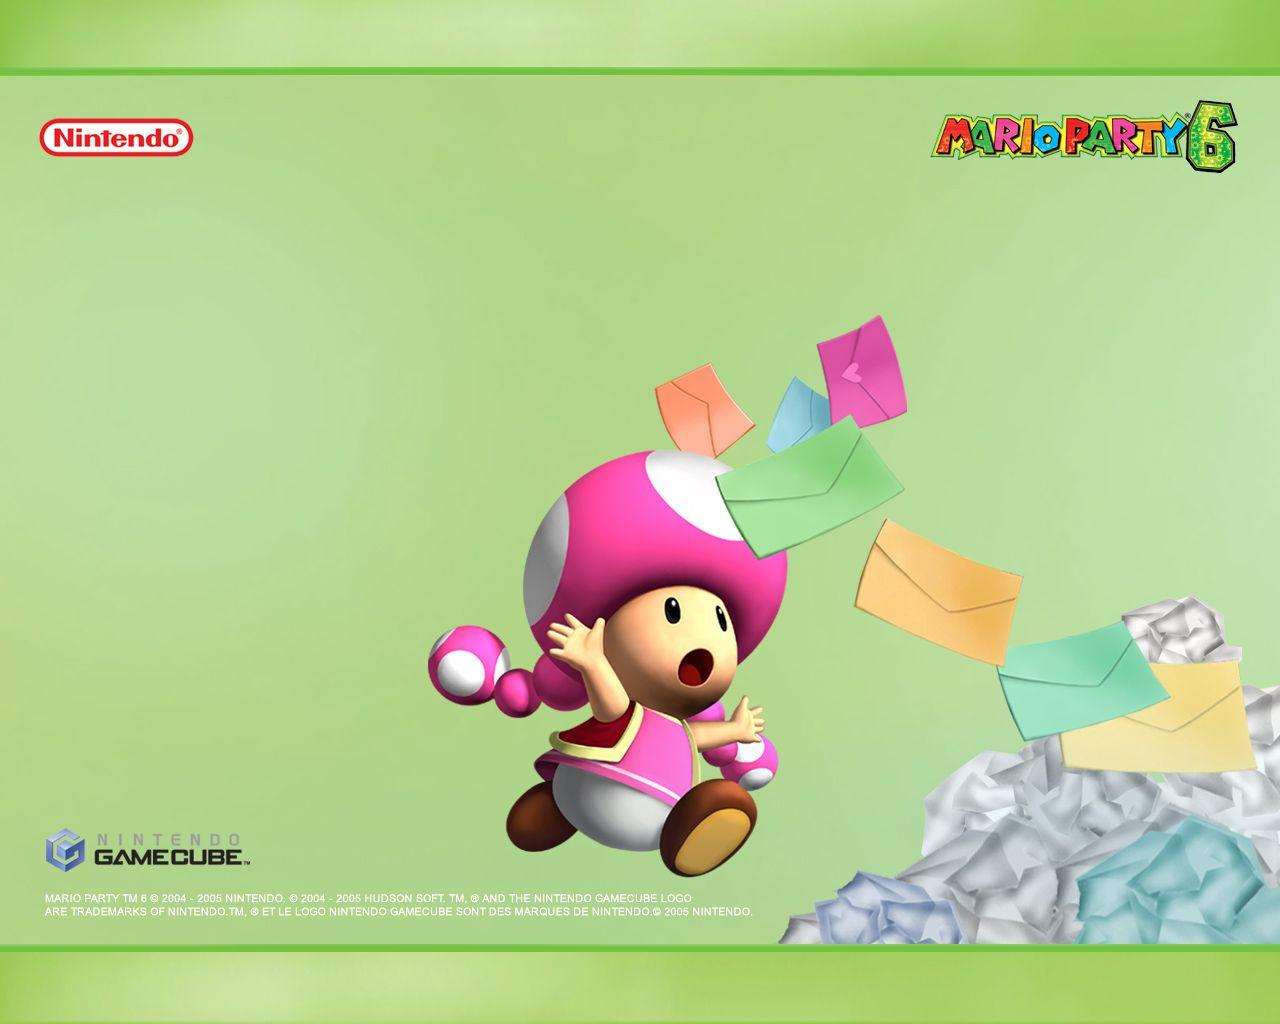 TOADETTE Logo - Nintendo images Toadette HD wallpaper and background photos (25770480)